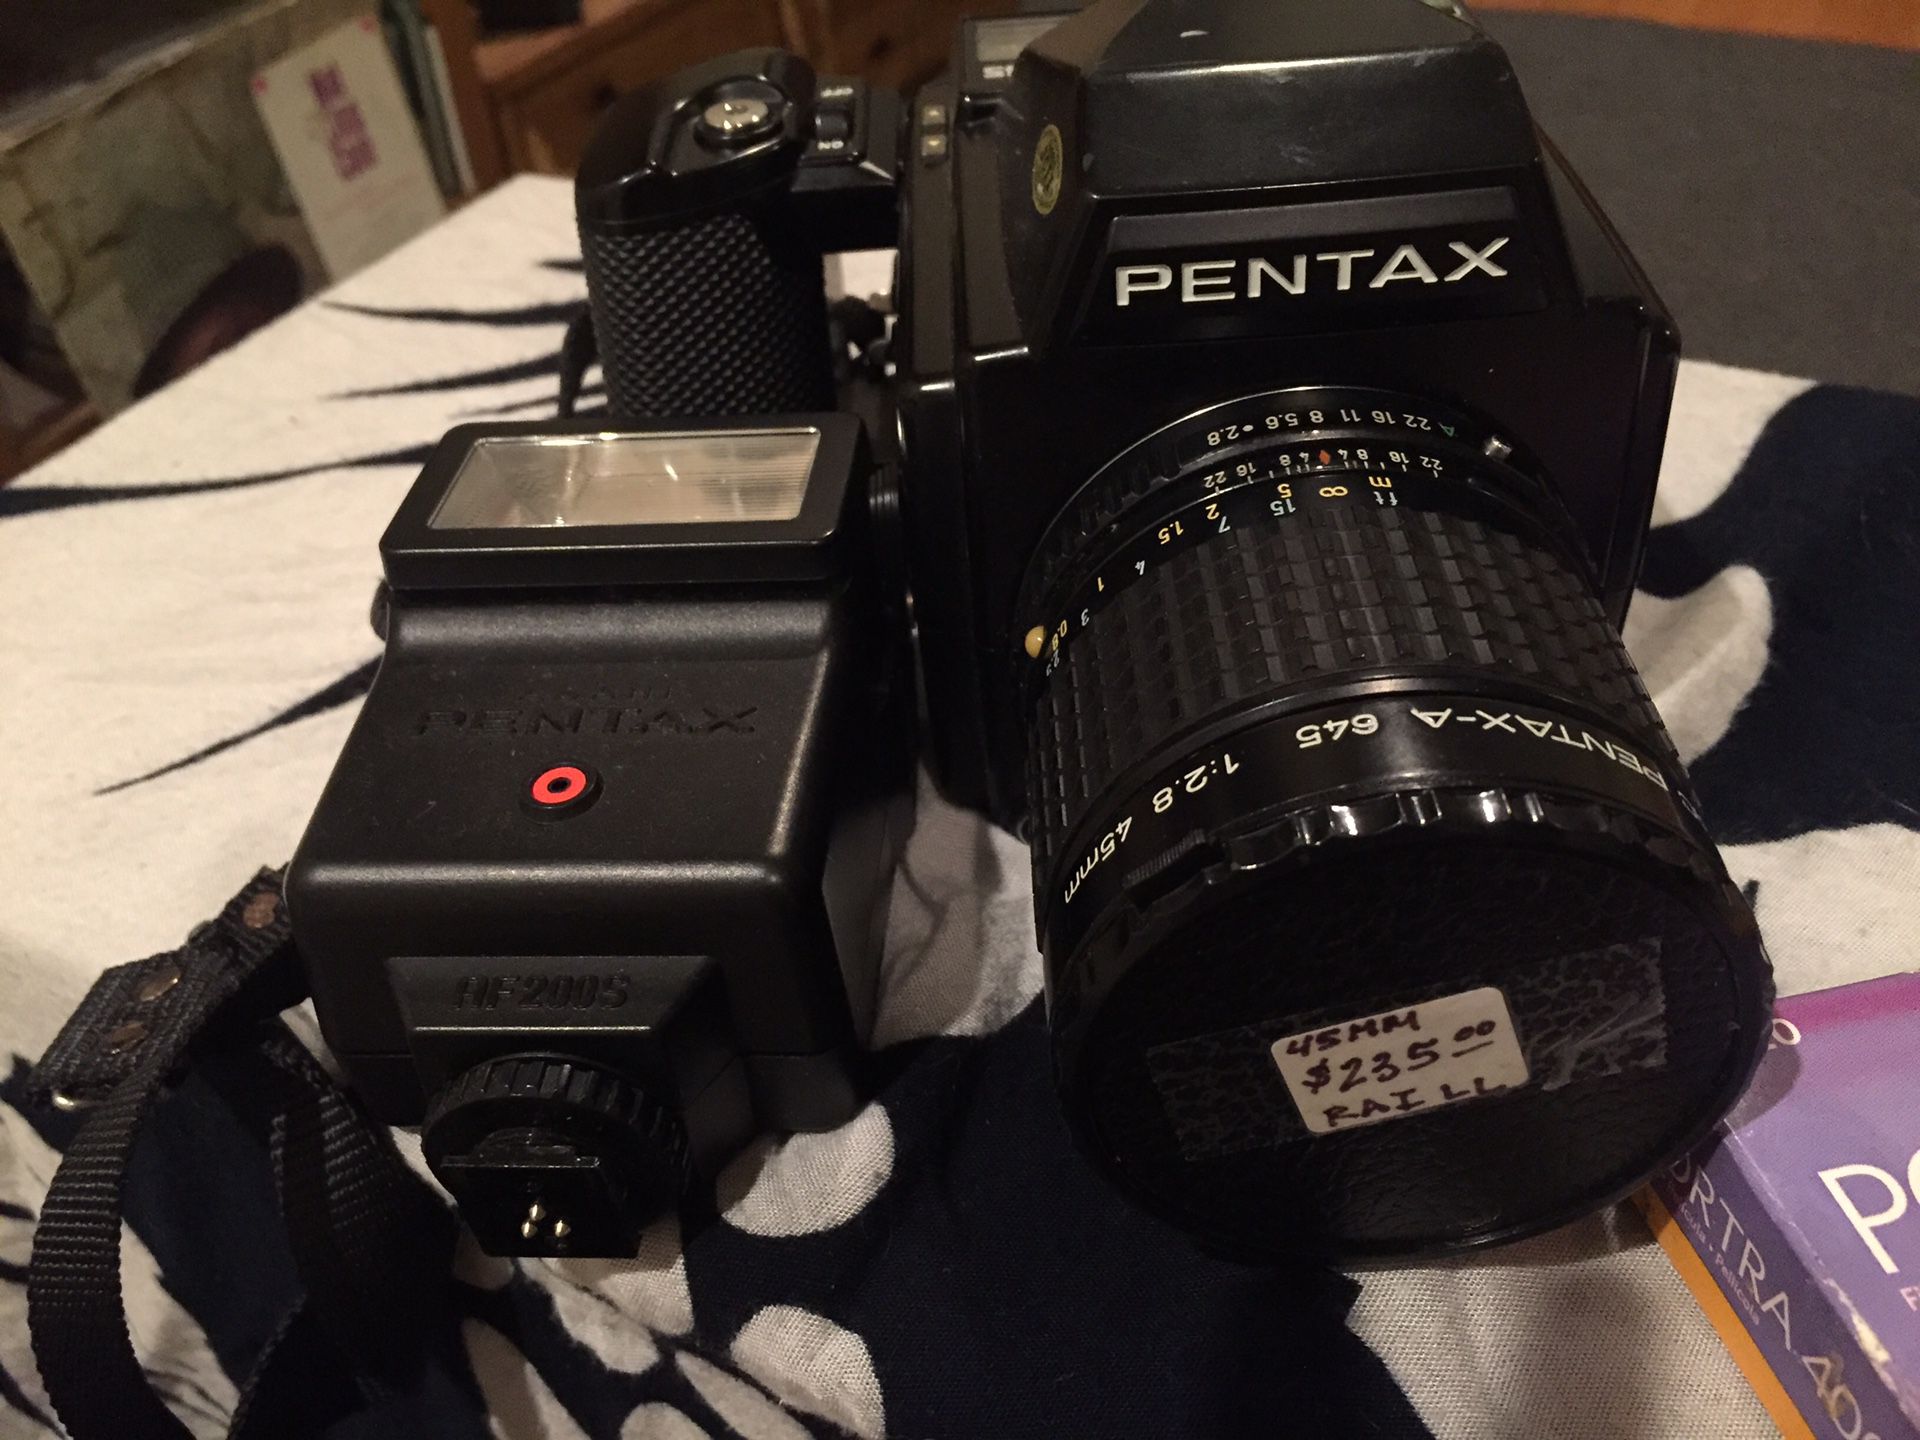 Pentax 645 with lens and flash